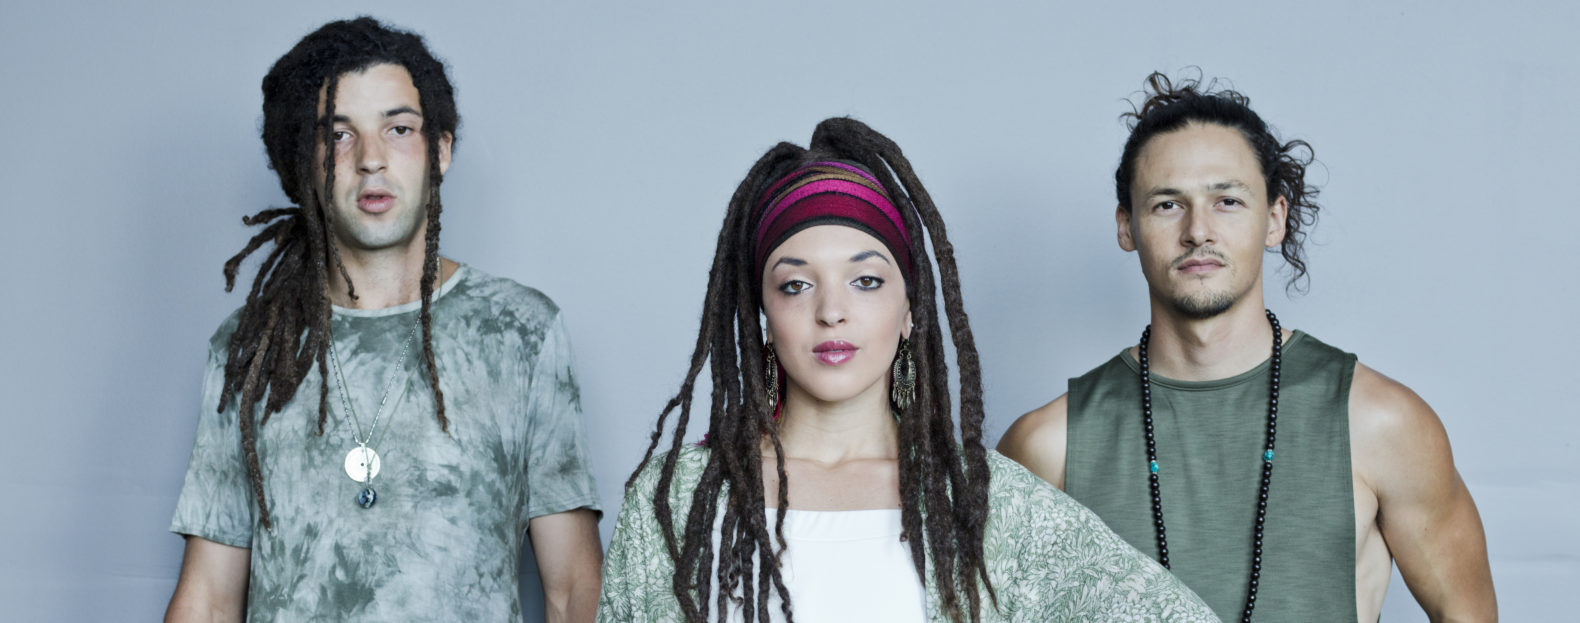 SayReal promo image, three people against a grey background